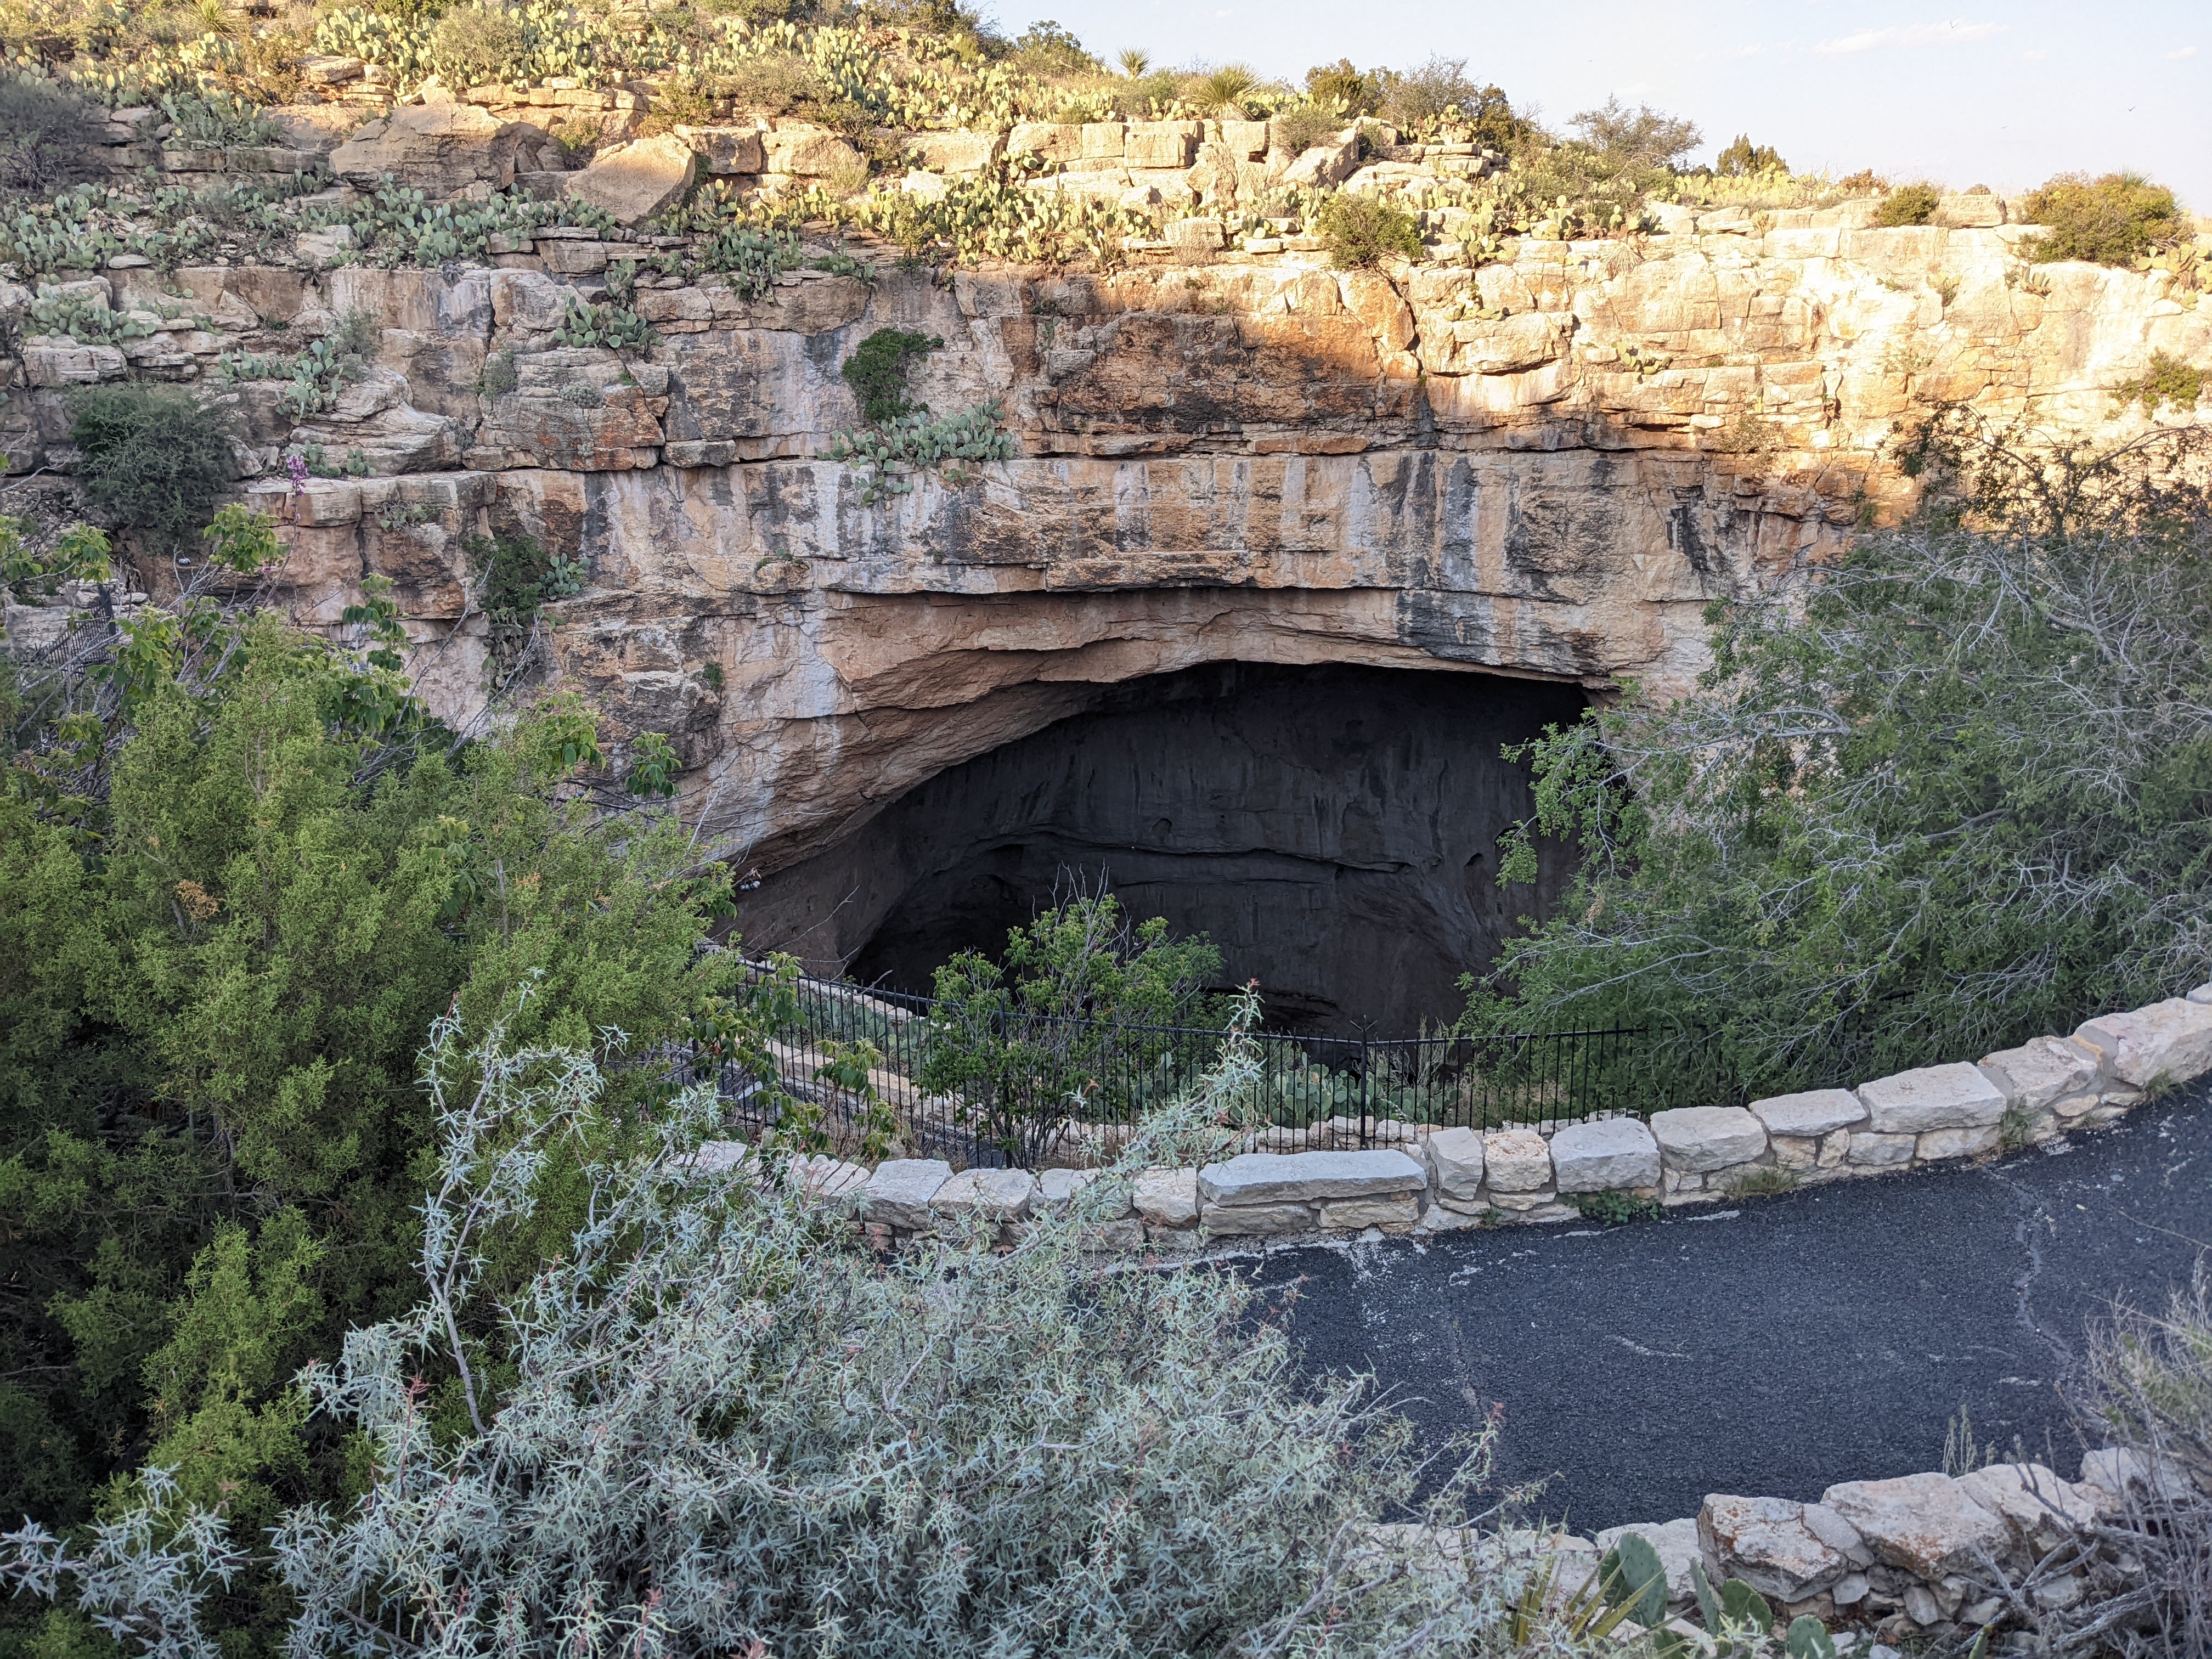 A huge opening in the desert ground: the mouth of Carlsbad Cavern's main natural entrance